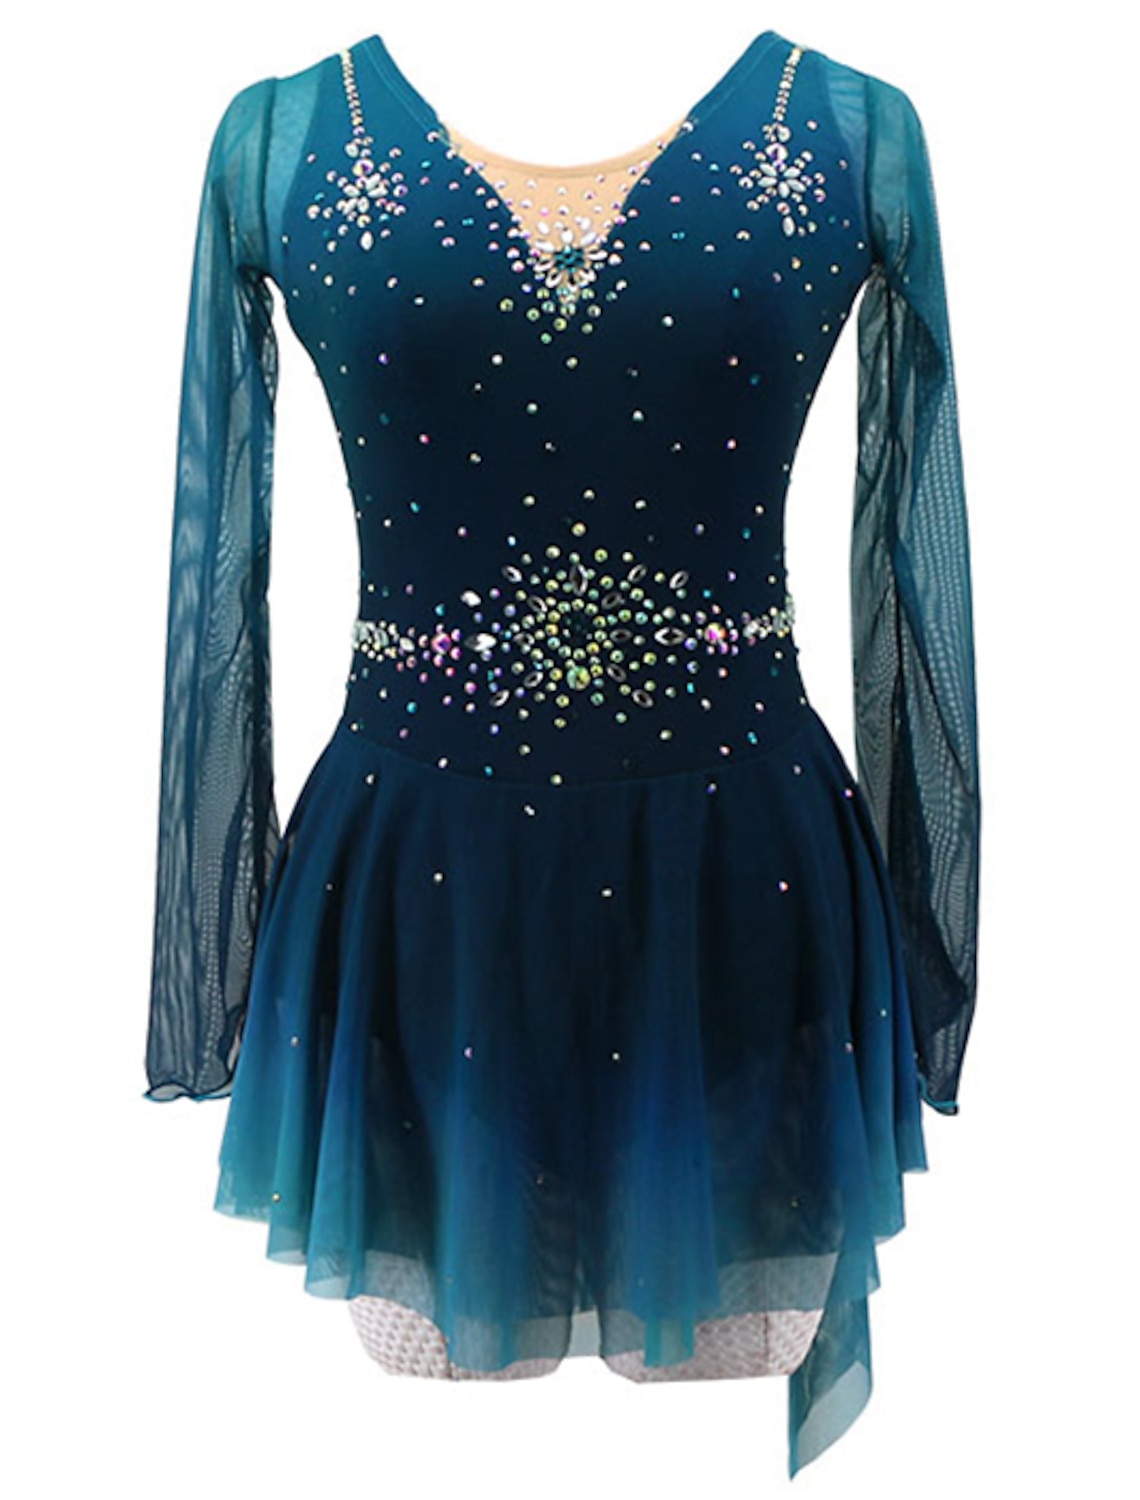 Skating Queen Figure Skating Dress for Girls Women Ice Skating Competition Professional Costume Stage Performance Lace Rhinestone Handmade Elastic Quick Dry Skating Wear Long Sleeves Black 